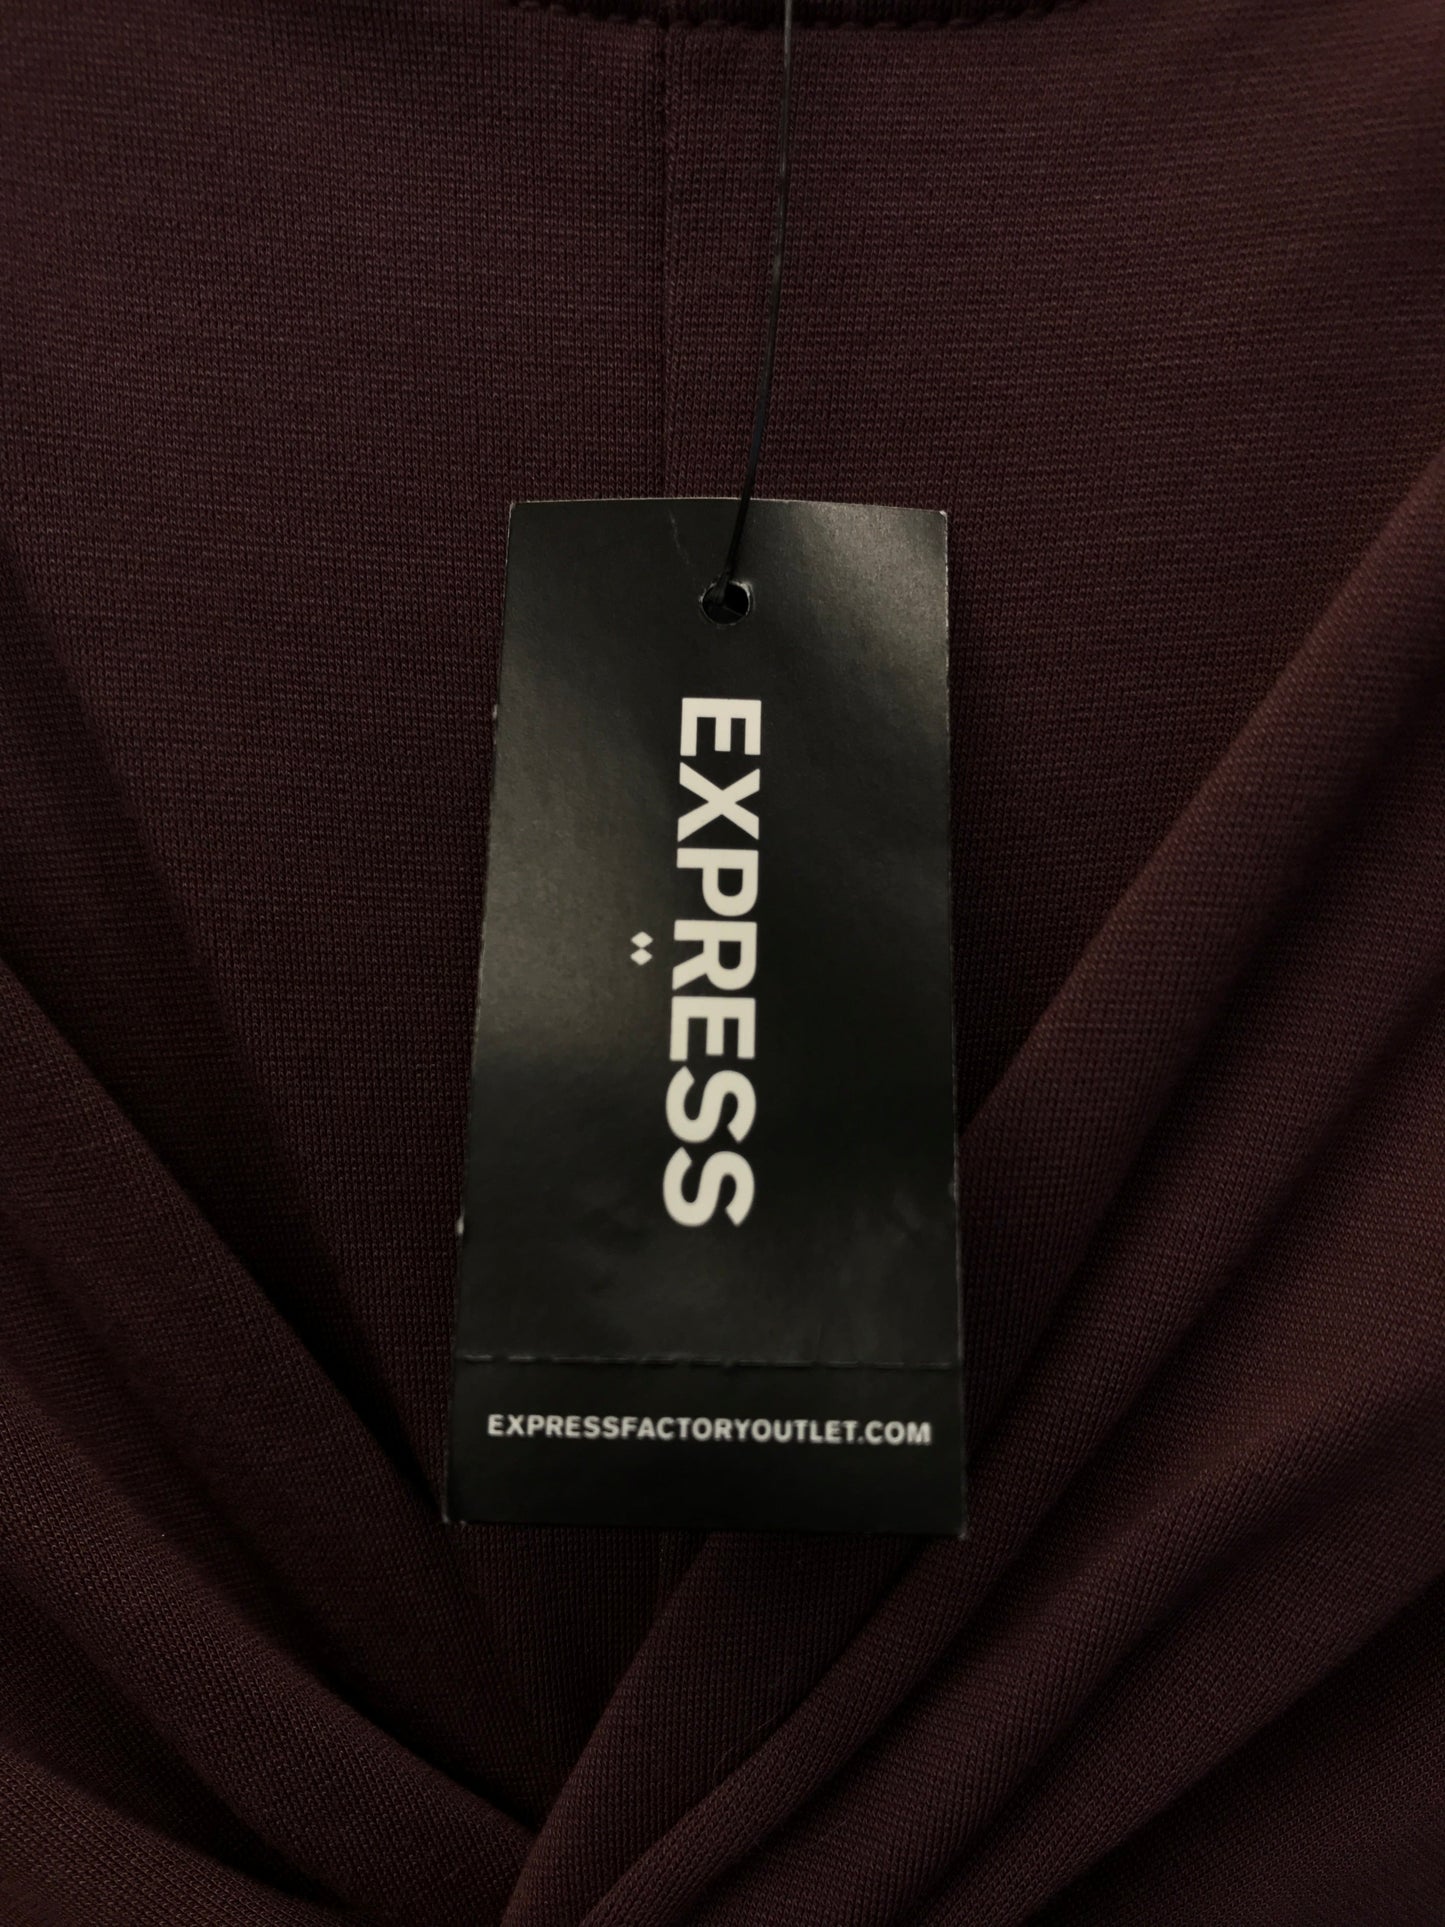 Dress Casual Midi By Express  Size: M